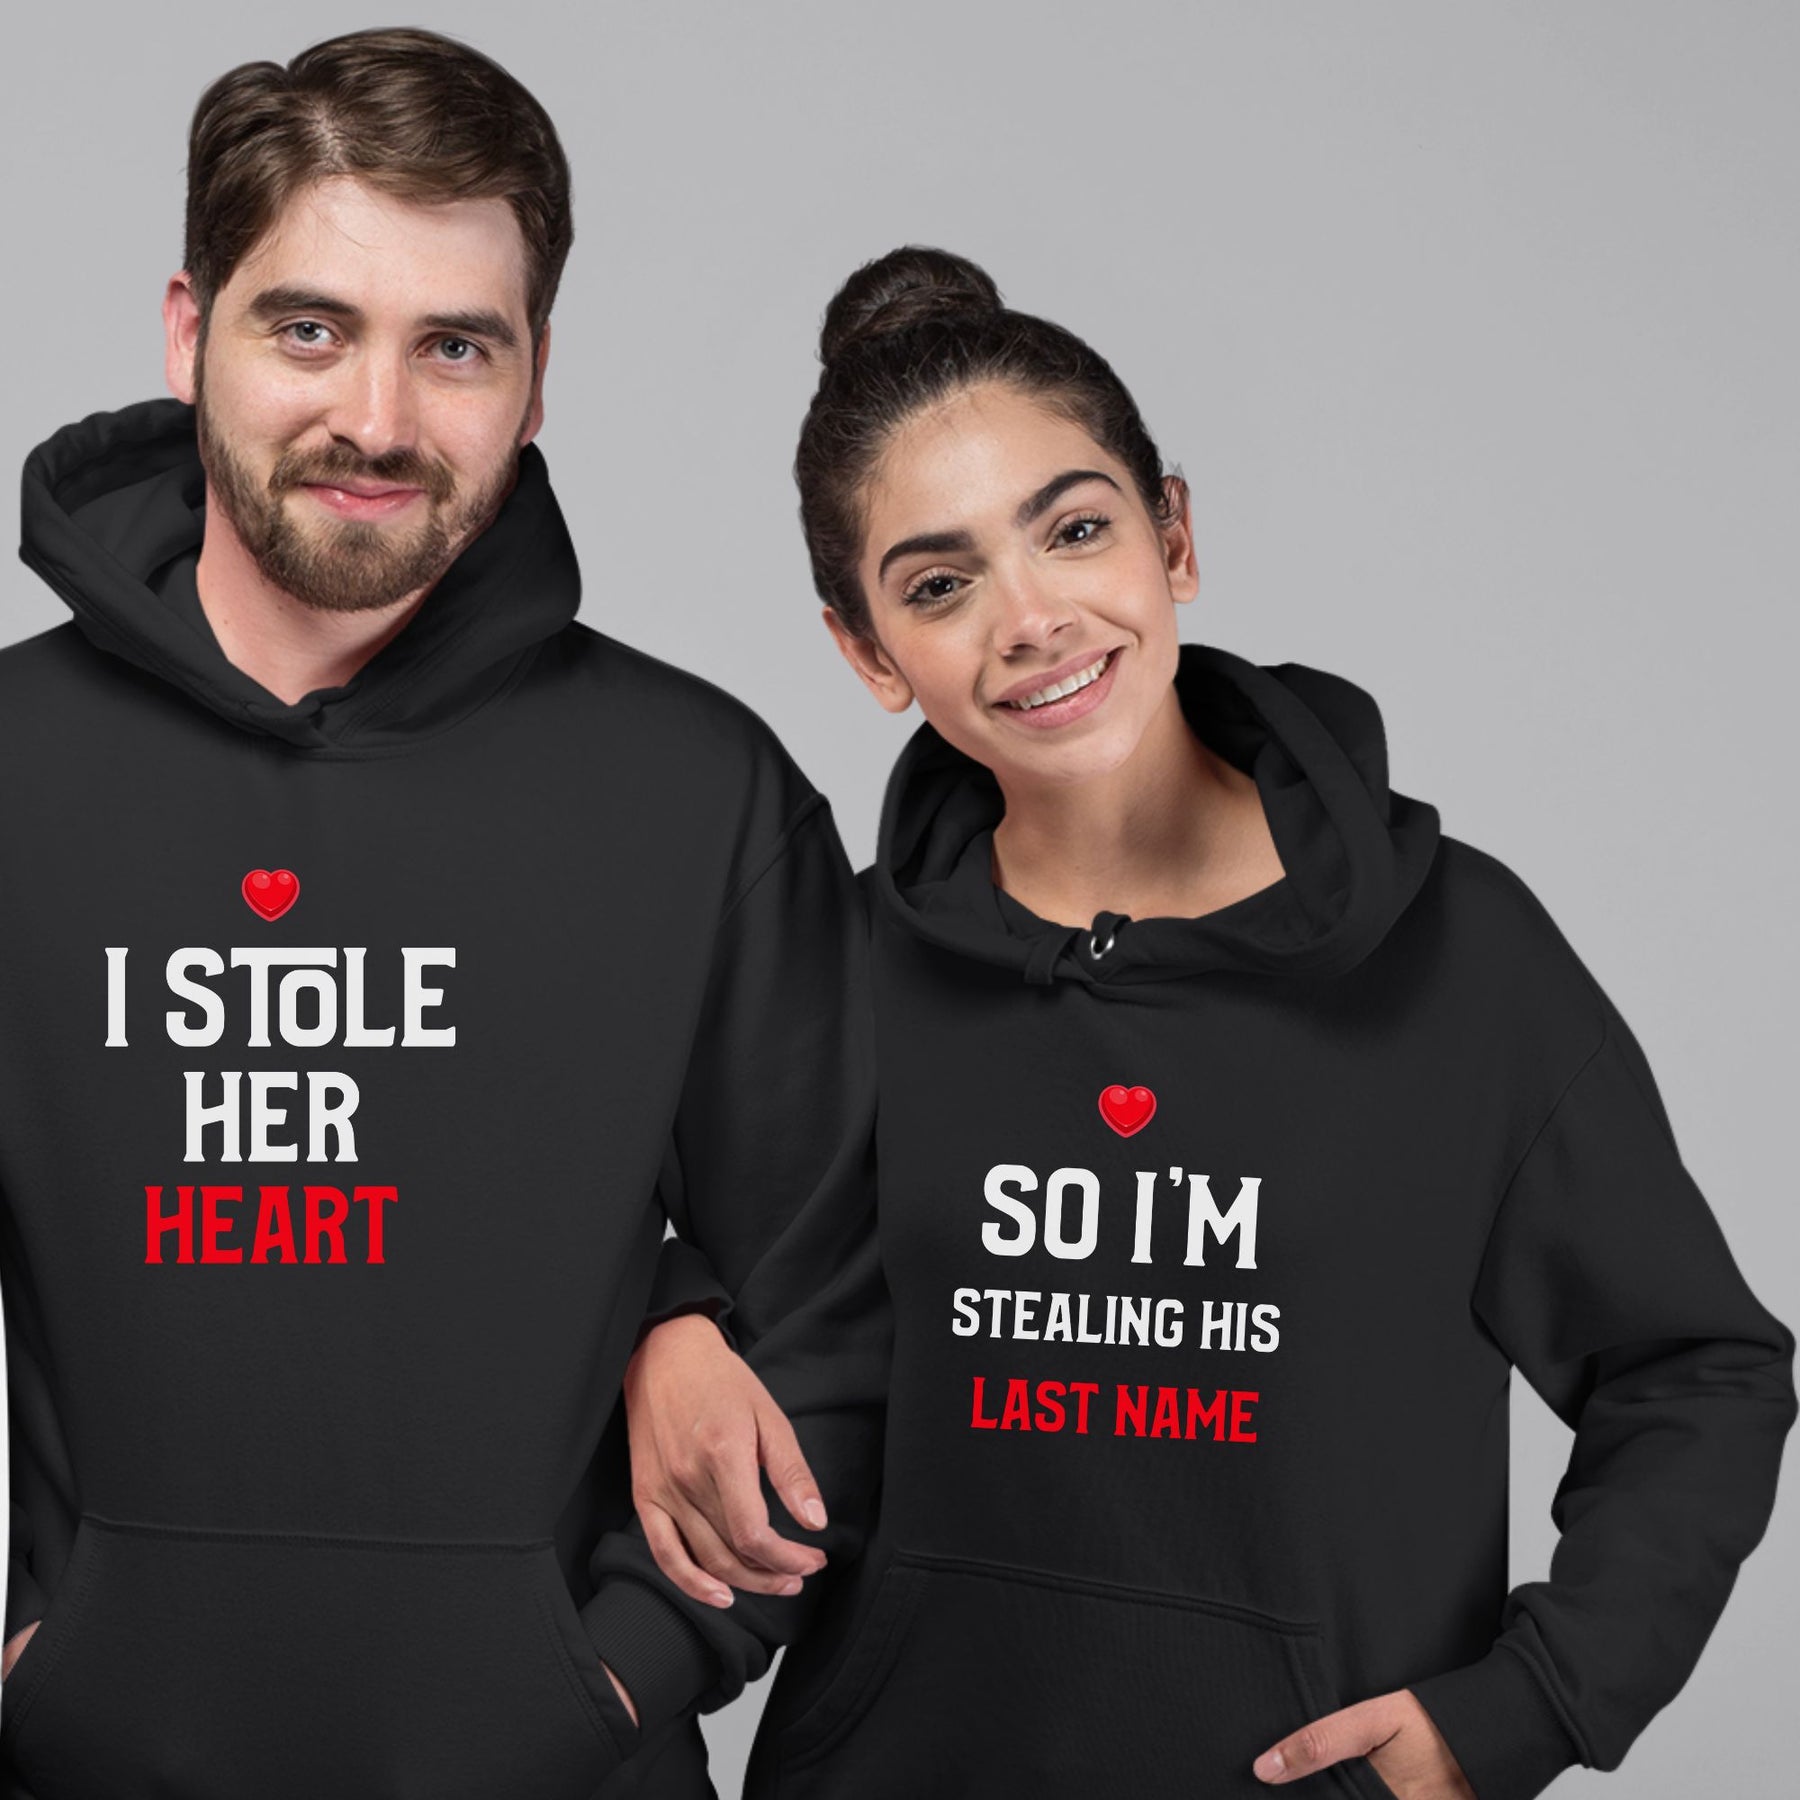 i-stole-her-heart-so-i-am-stealing-his-last-name-black-couple-hoodies-gogirgit